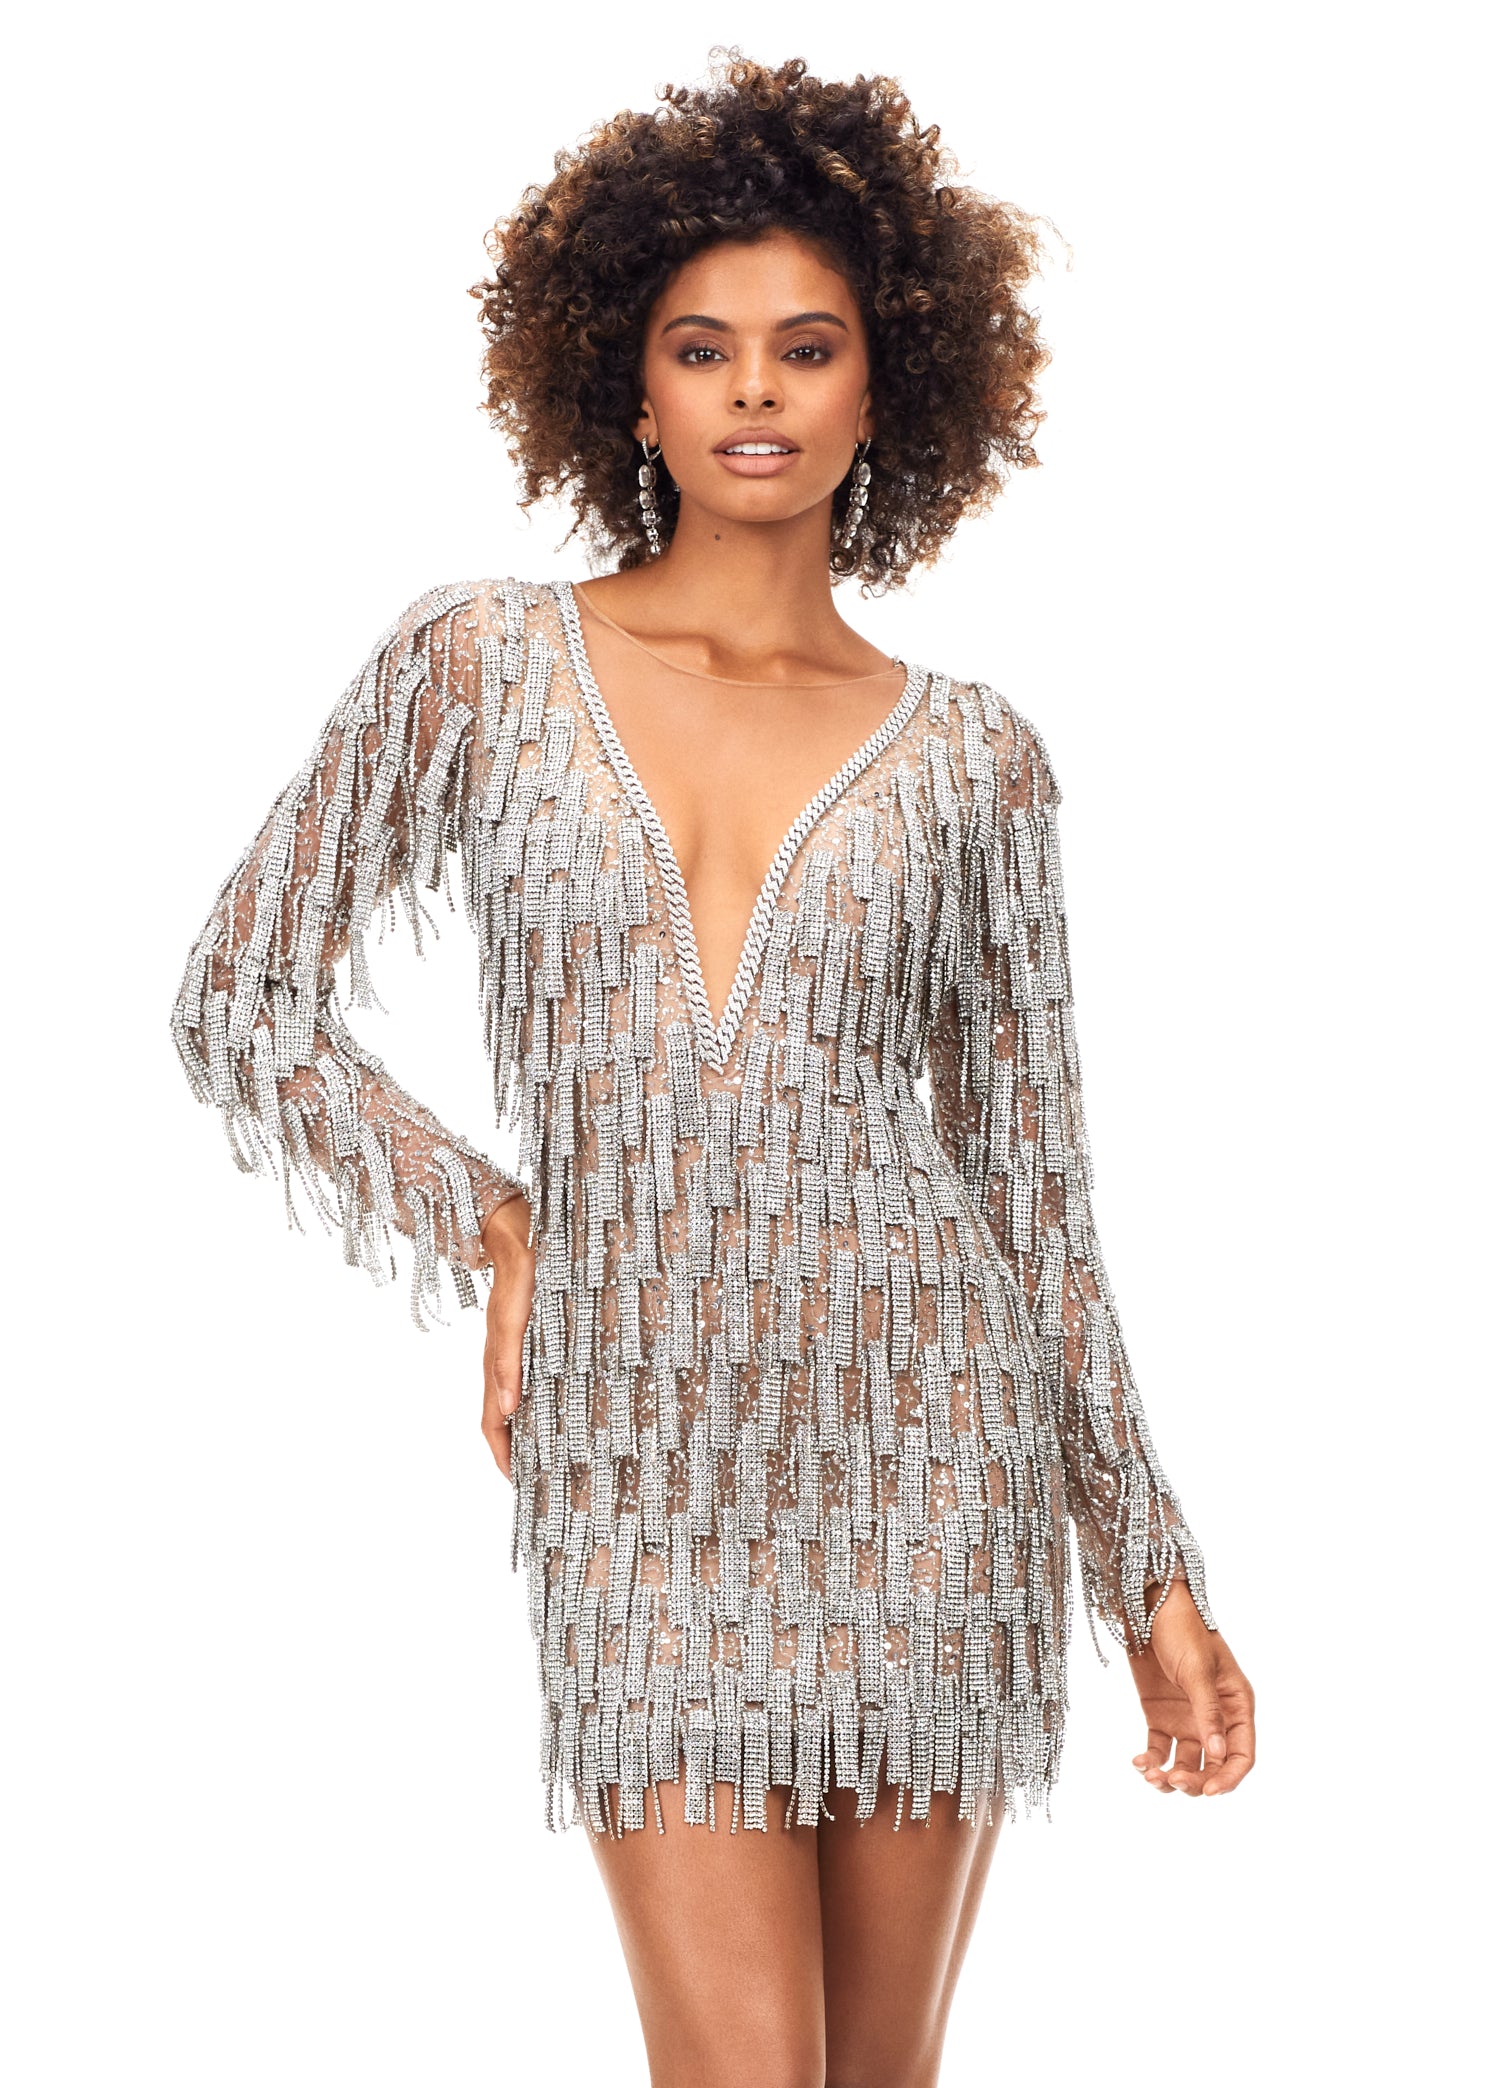 This sophisticated Ashley Lauren 4569 Beaded Cocktail Dress with Fringe and Fur Neckline is sure to turn heads. Its intricate beaded detailing, stylish fringe and luxurious fur neckline create a timeless look perfect for any special occasion.